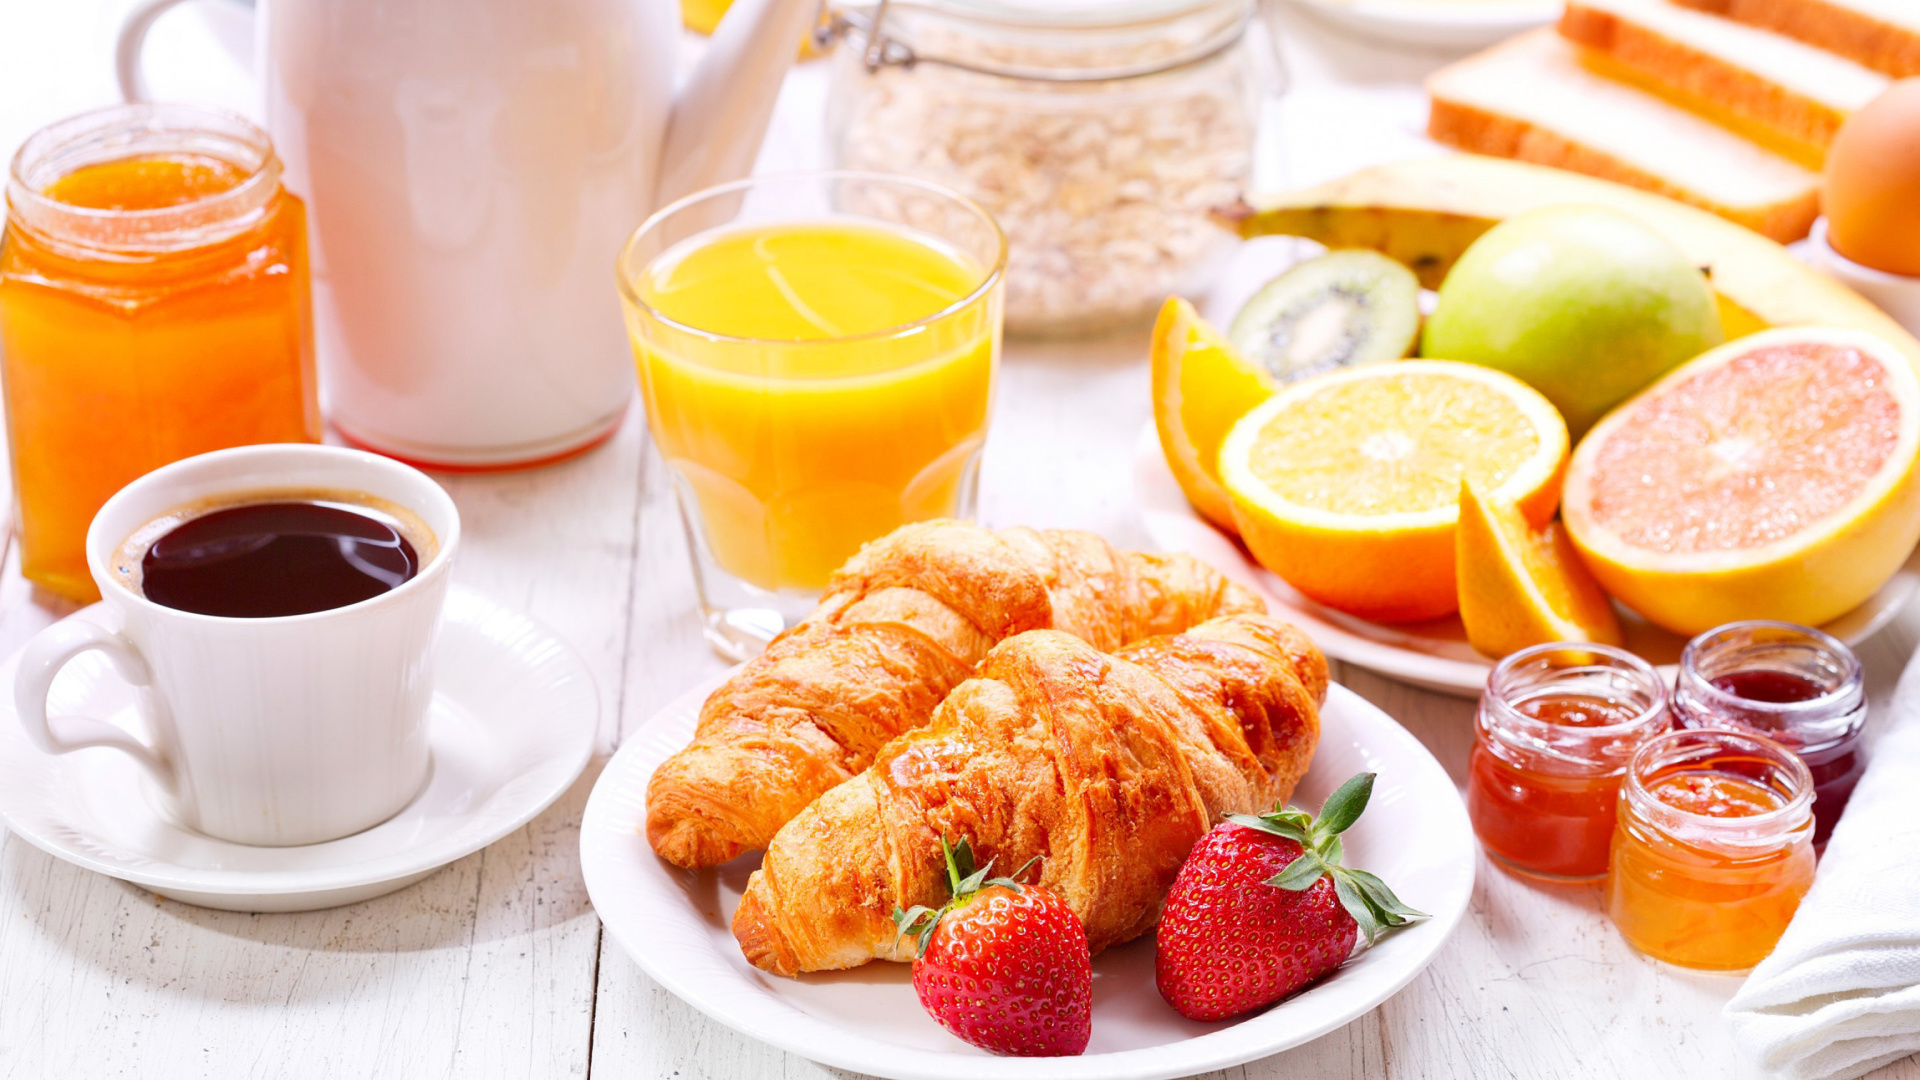 Breakfast with croissants and fruit wallpaper 1920x1080